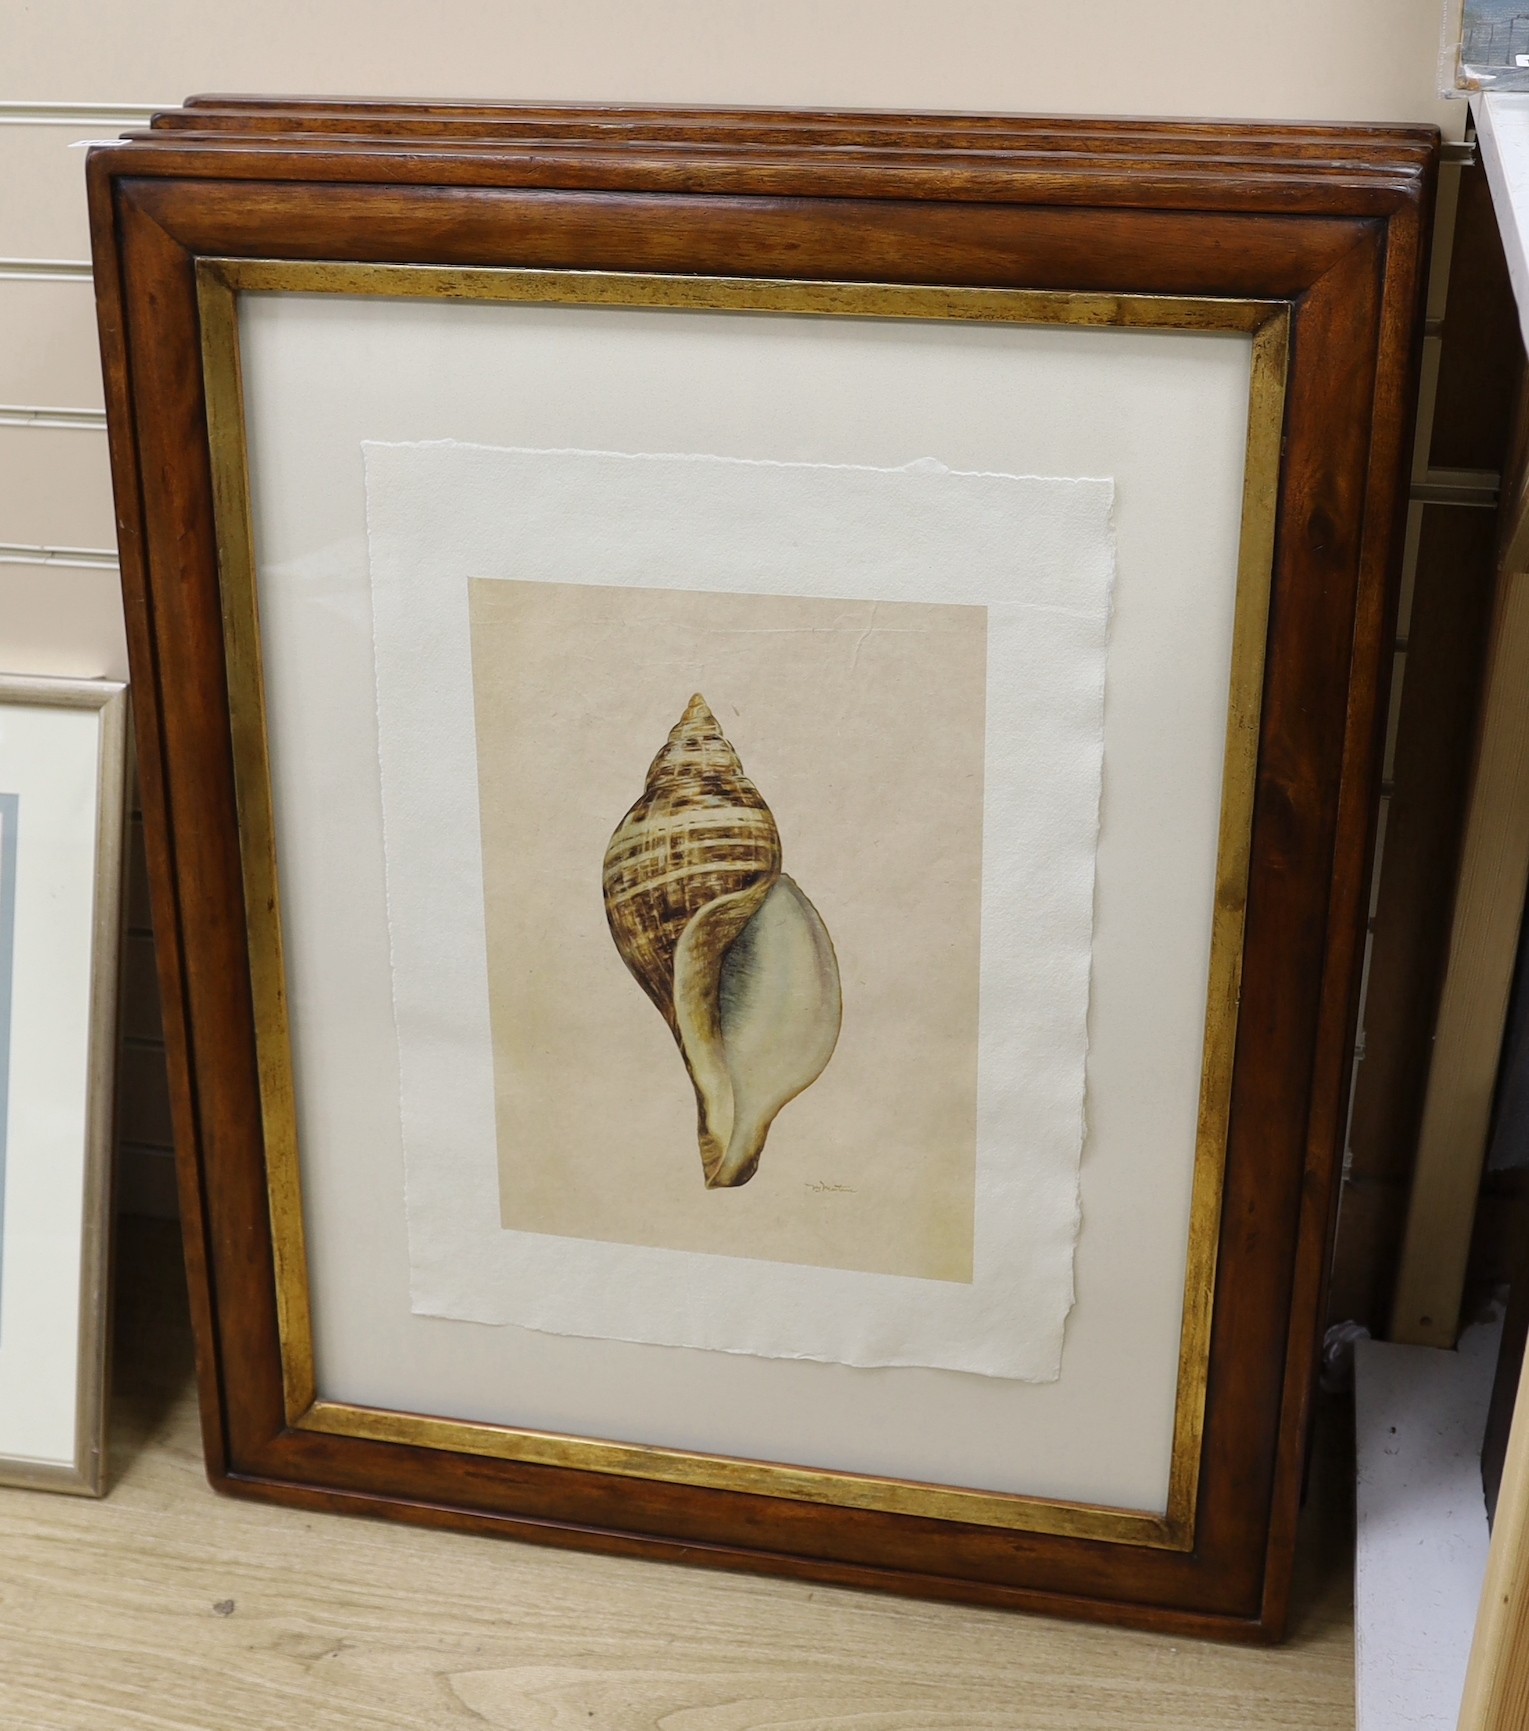 A set of four contemporary Giclee prints, studies of sea shells, in walnut frames, 43 x 29cm